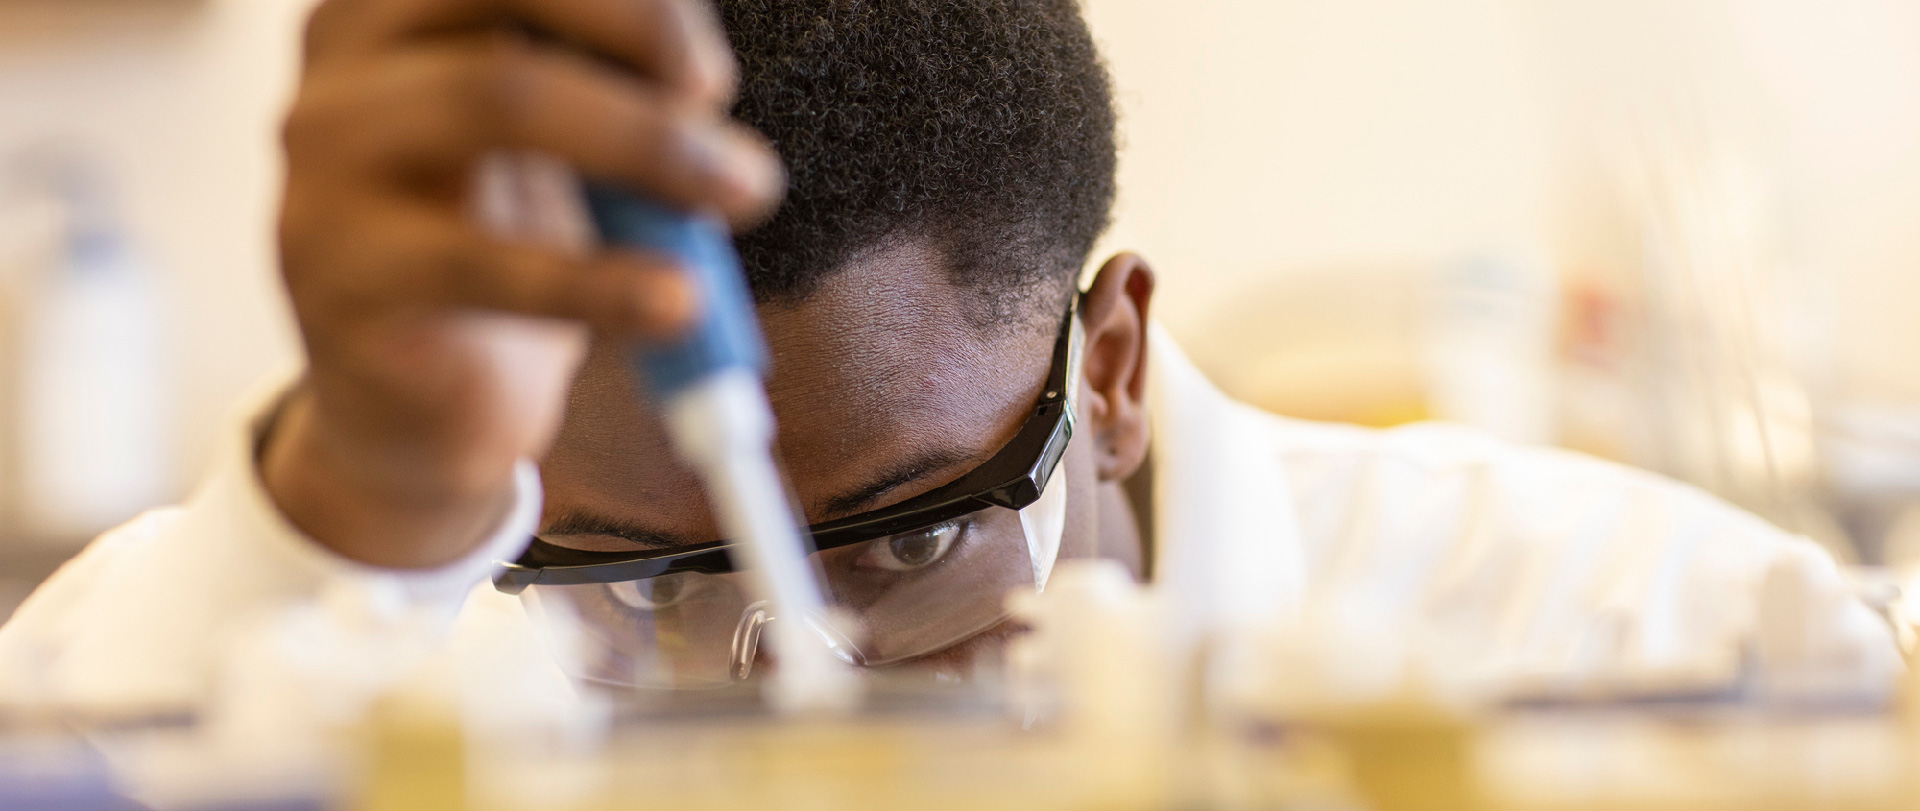 Student using a pipette in a lab at Ferris